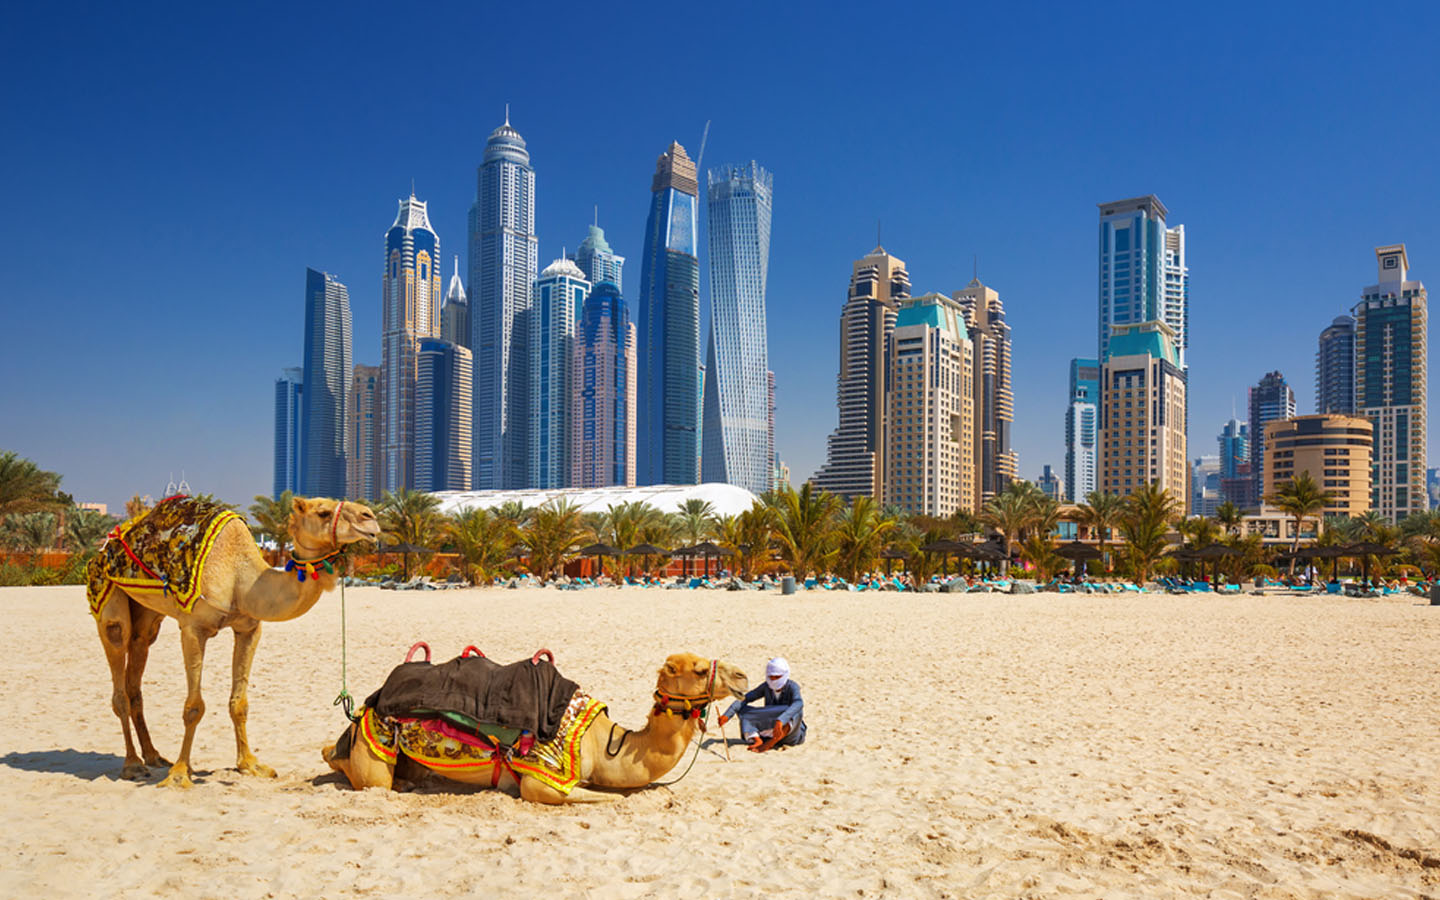 What is the best place to visit when traveling to Dubai?